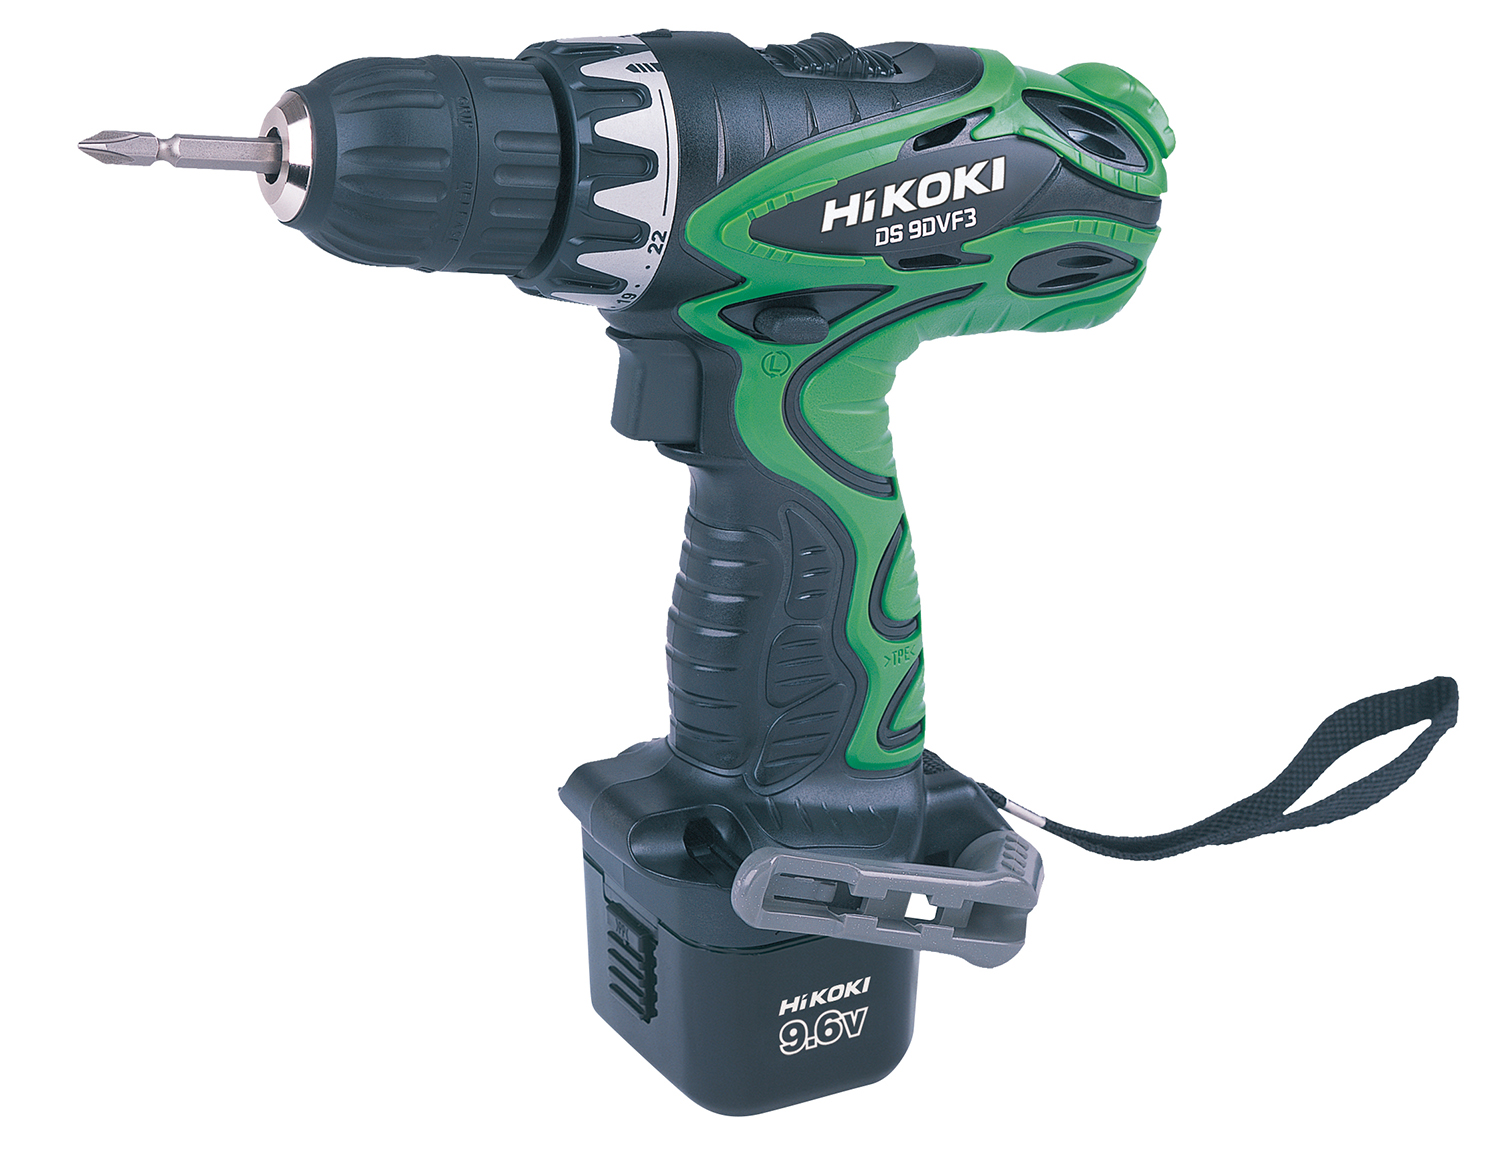 Cordless Driver Drill DS9DVF3